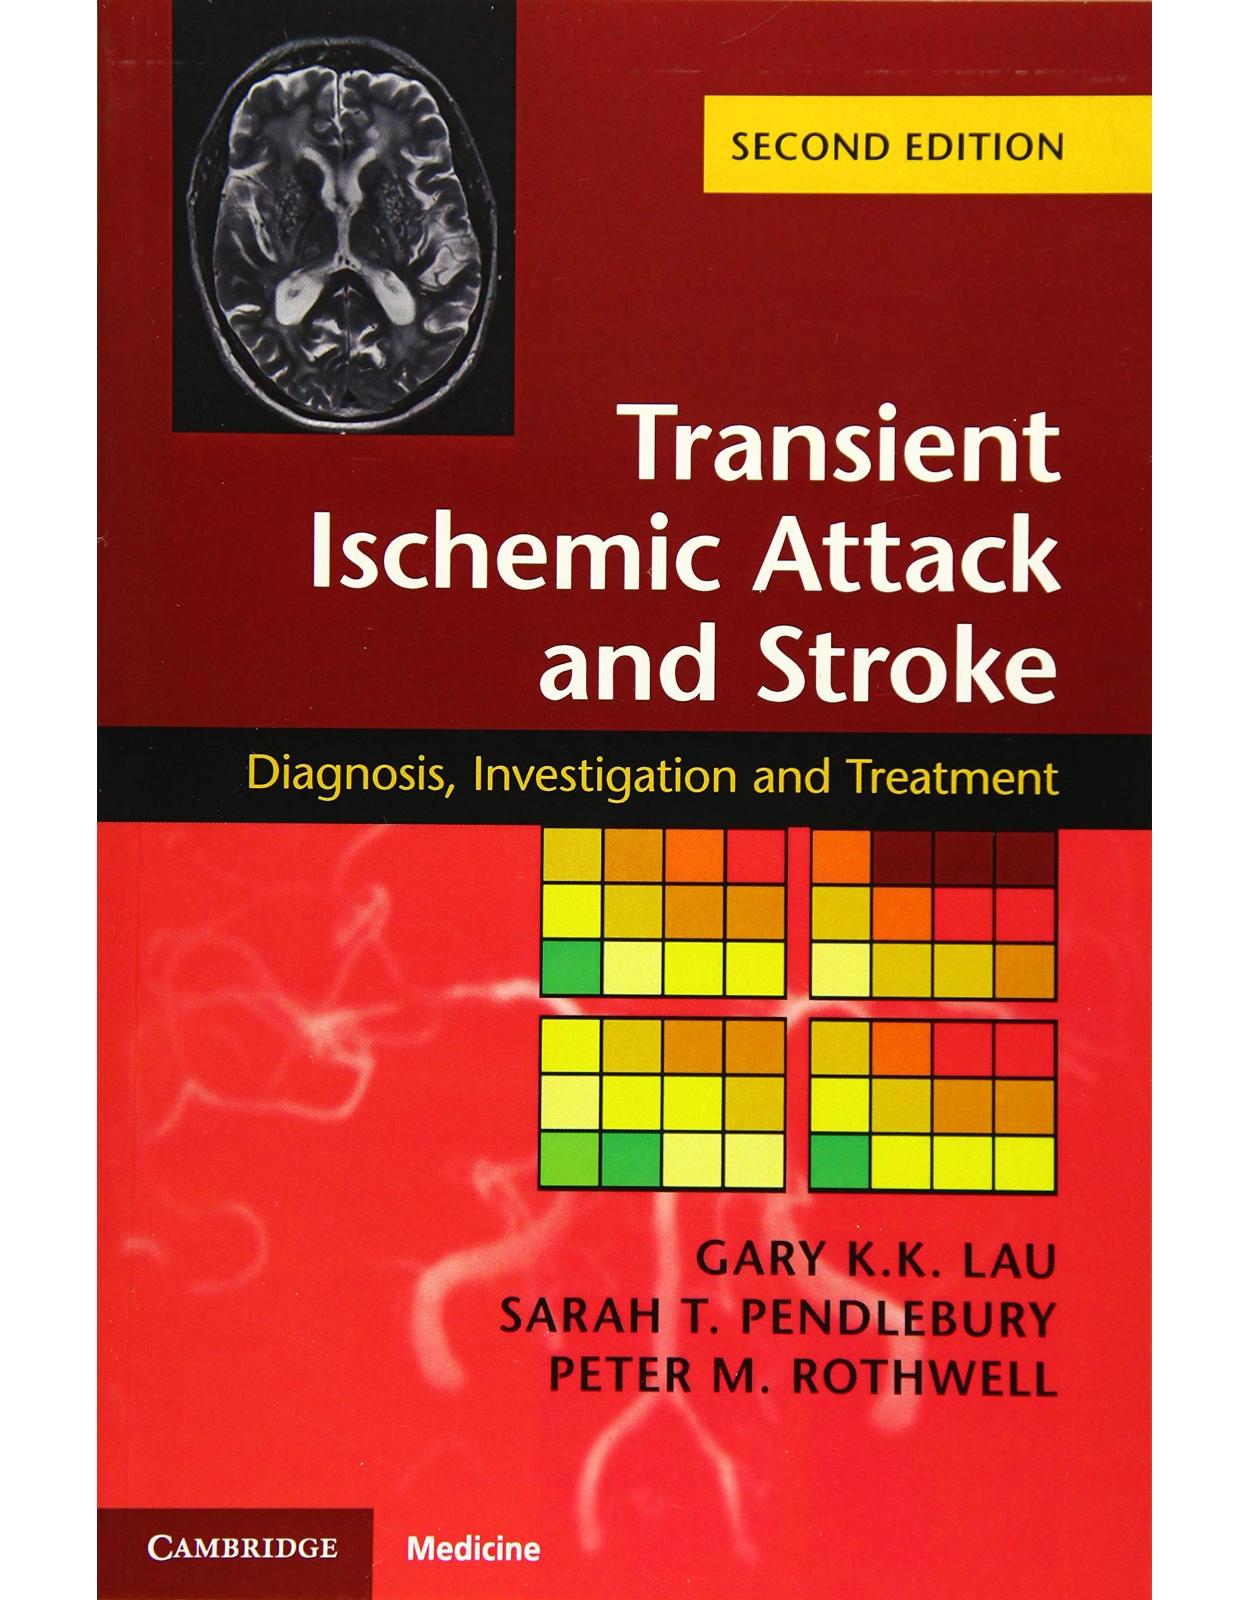 Transient Ischemic Attack and Stroke: Diagnosis, Investigation and Treatment